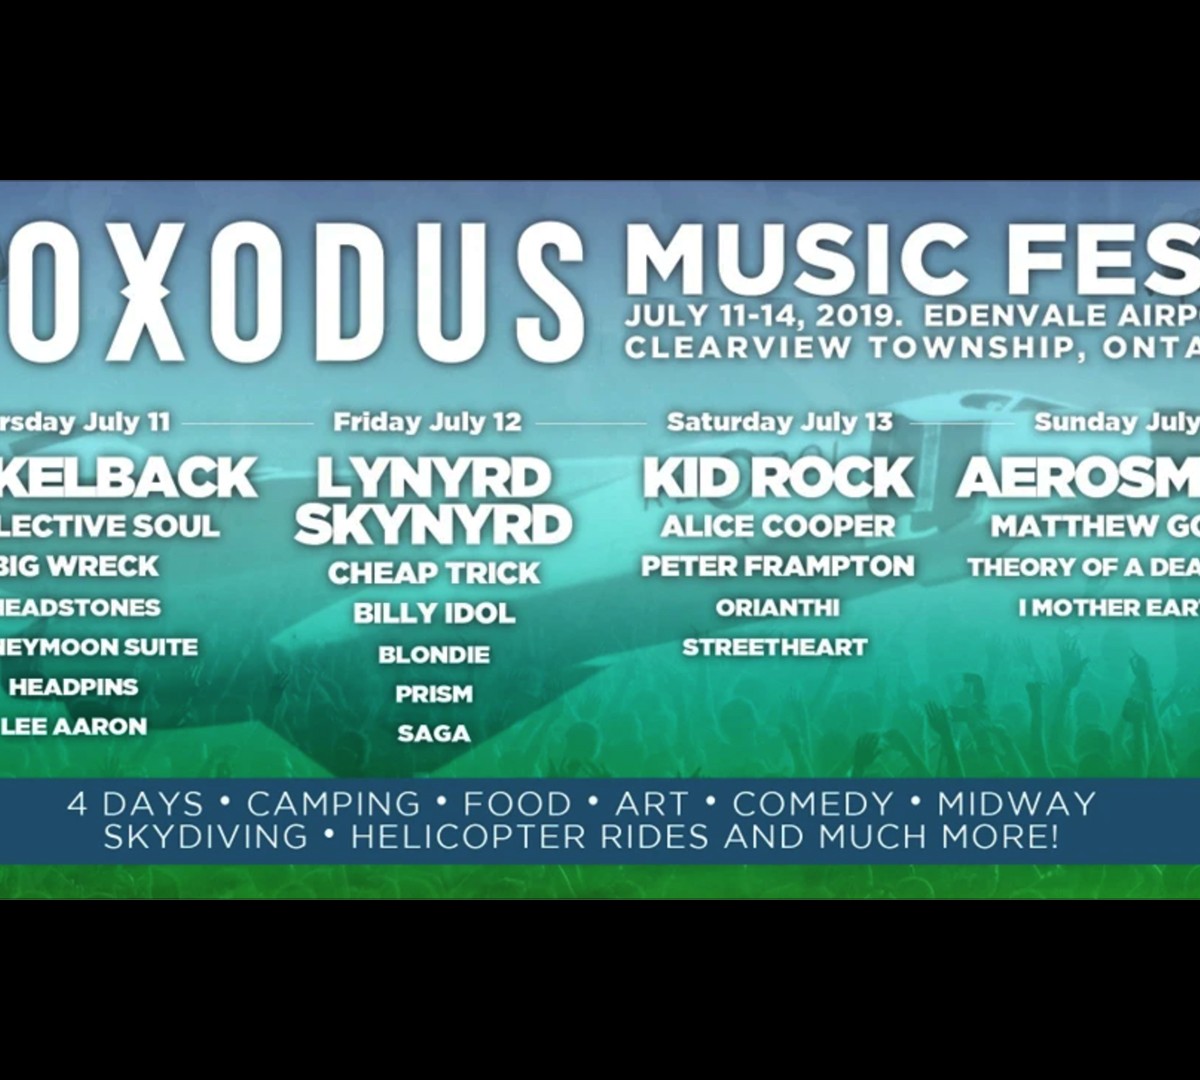 Roxodus Music Fest Single Day Tickets On Sale Now